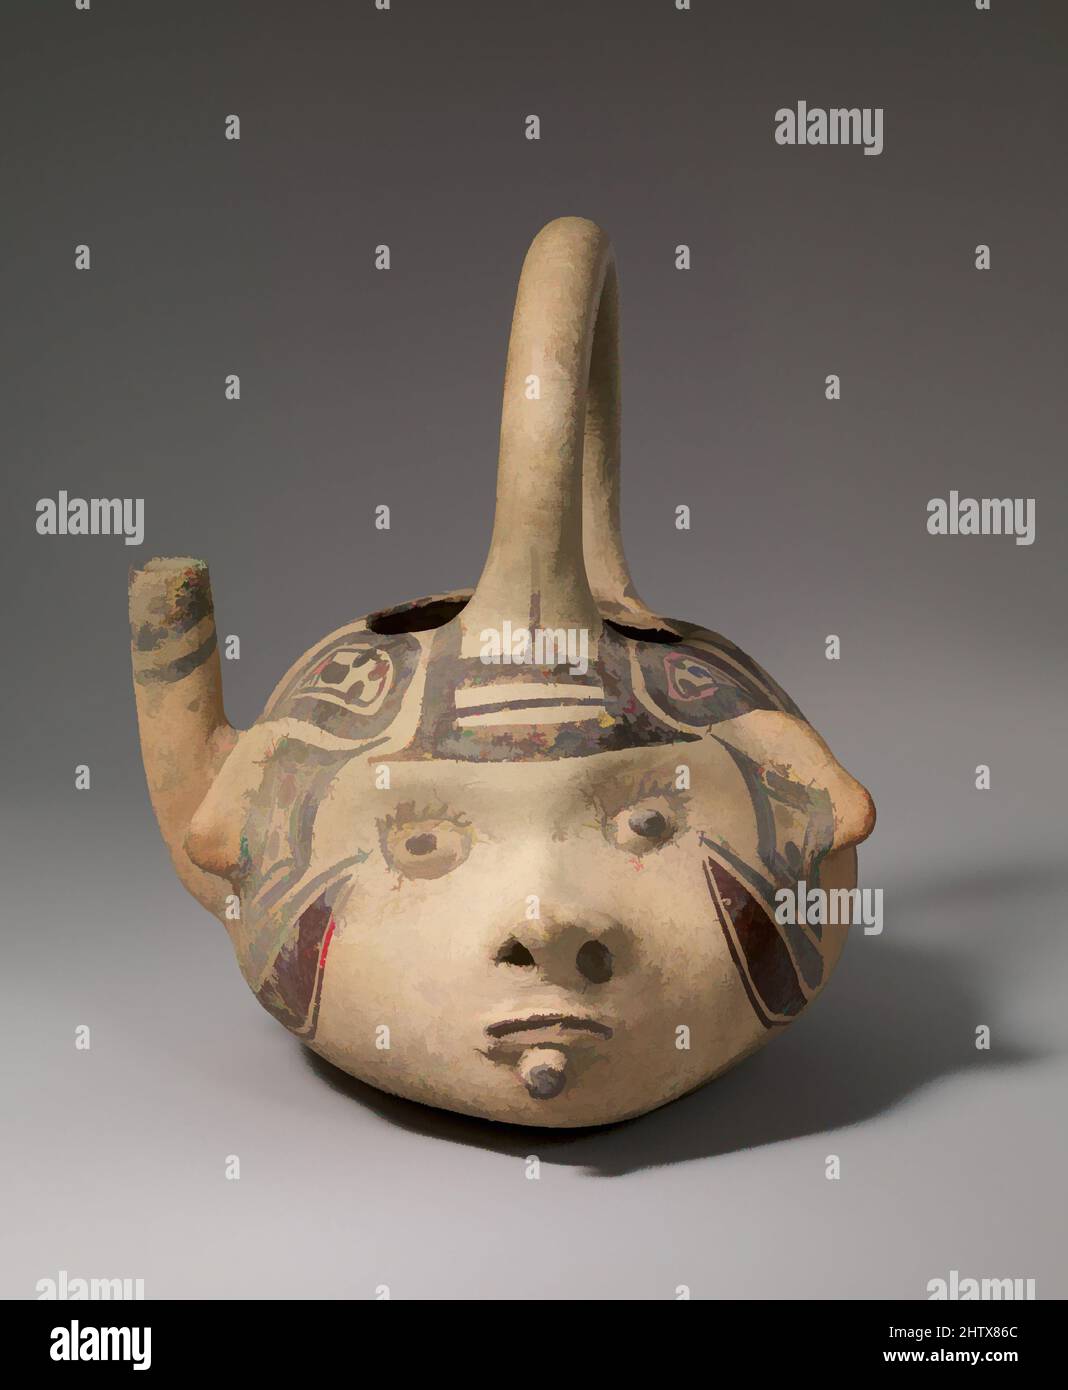 Art inspired by Spouted Vessel, 13th–15th century, Mexico, Mesoamerica, Veracruz, Huastec, Ceramic, H. 7 1/2 x W. 6 5/16 in. (19.1 x 16 cm), Ceramics-Containers, The vessel is in the shape of a human head with wide open, staring eyes, a small pug nose, and closed mouth. A lip plug is, Classic works modernized by Artotop with a splash of modernity. Shapes, color and value, eye-catching visual impact on art. Emotions through freedom of artworks in a contemporary way. A timeless message pursuing a wildly creative new direction. Artists turning to the digital medium and creating the Artotop NFT Stock Photo